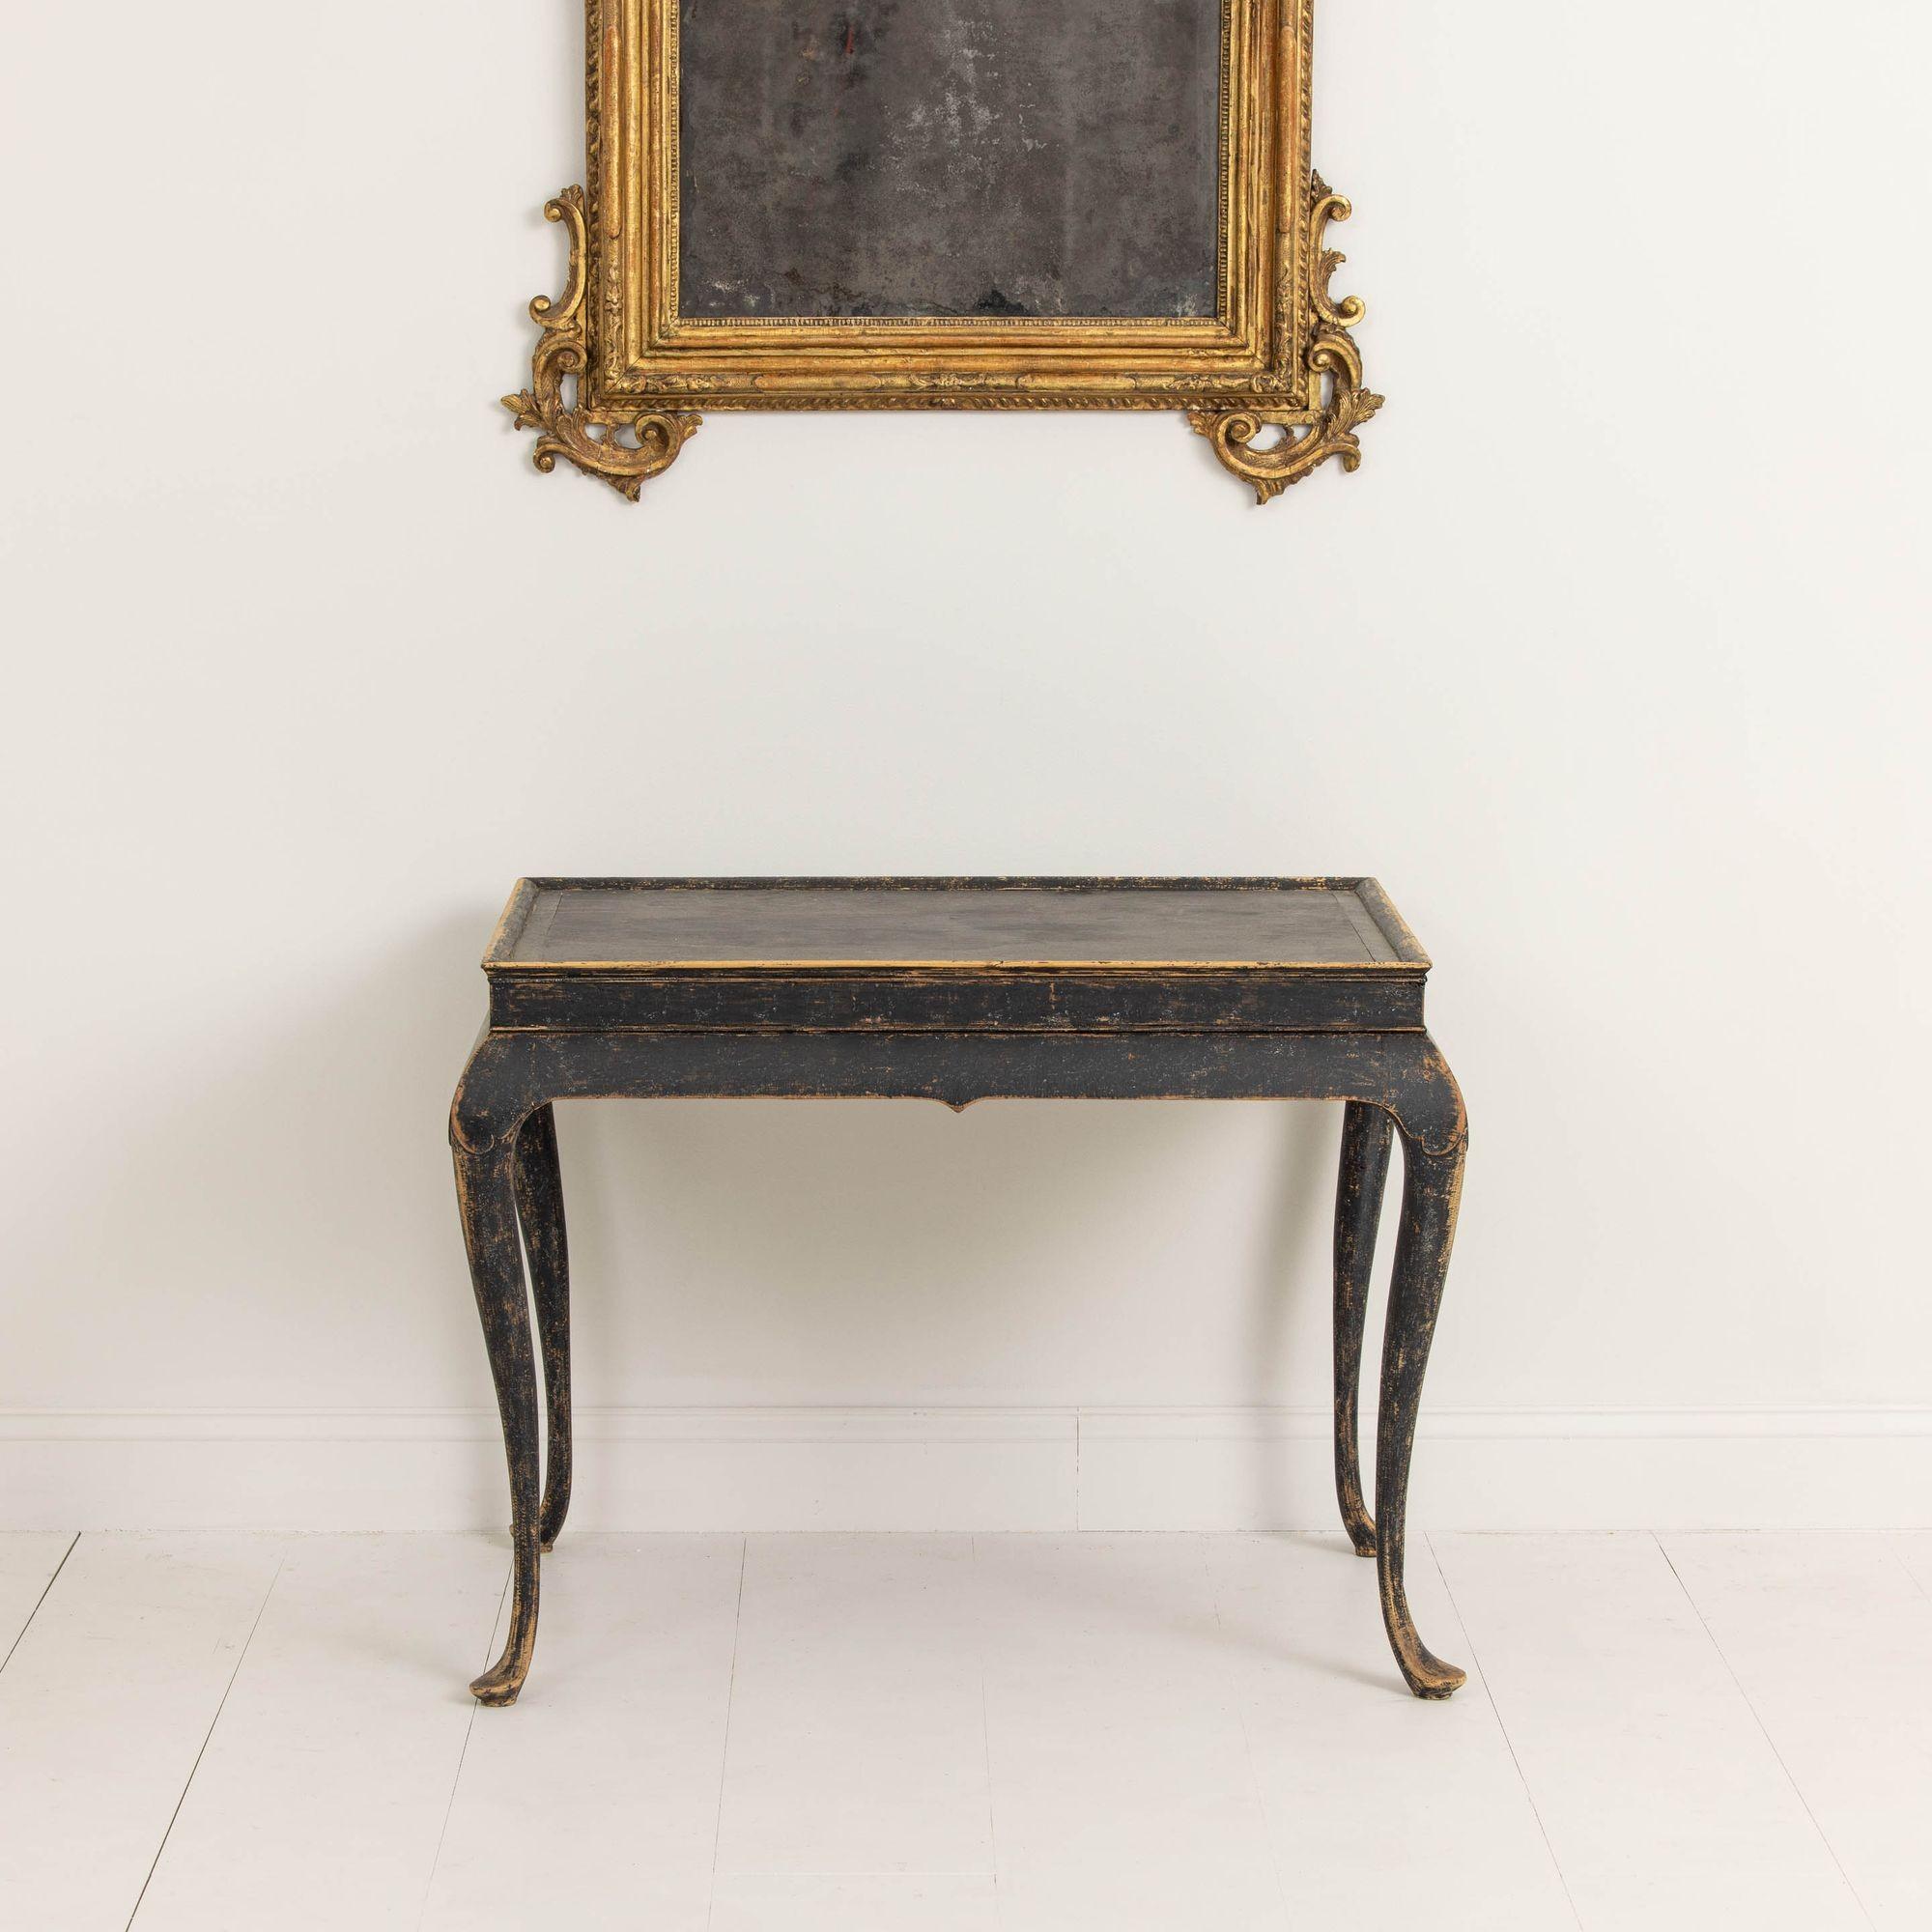 18th Century and Earlier 18th c. Swedish Rococo Period Black Painted Tea Table